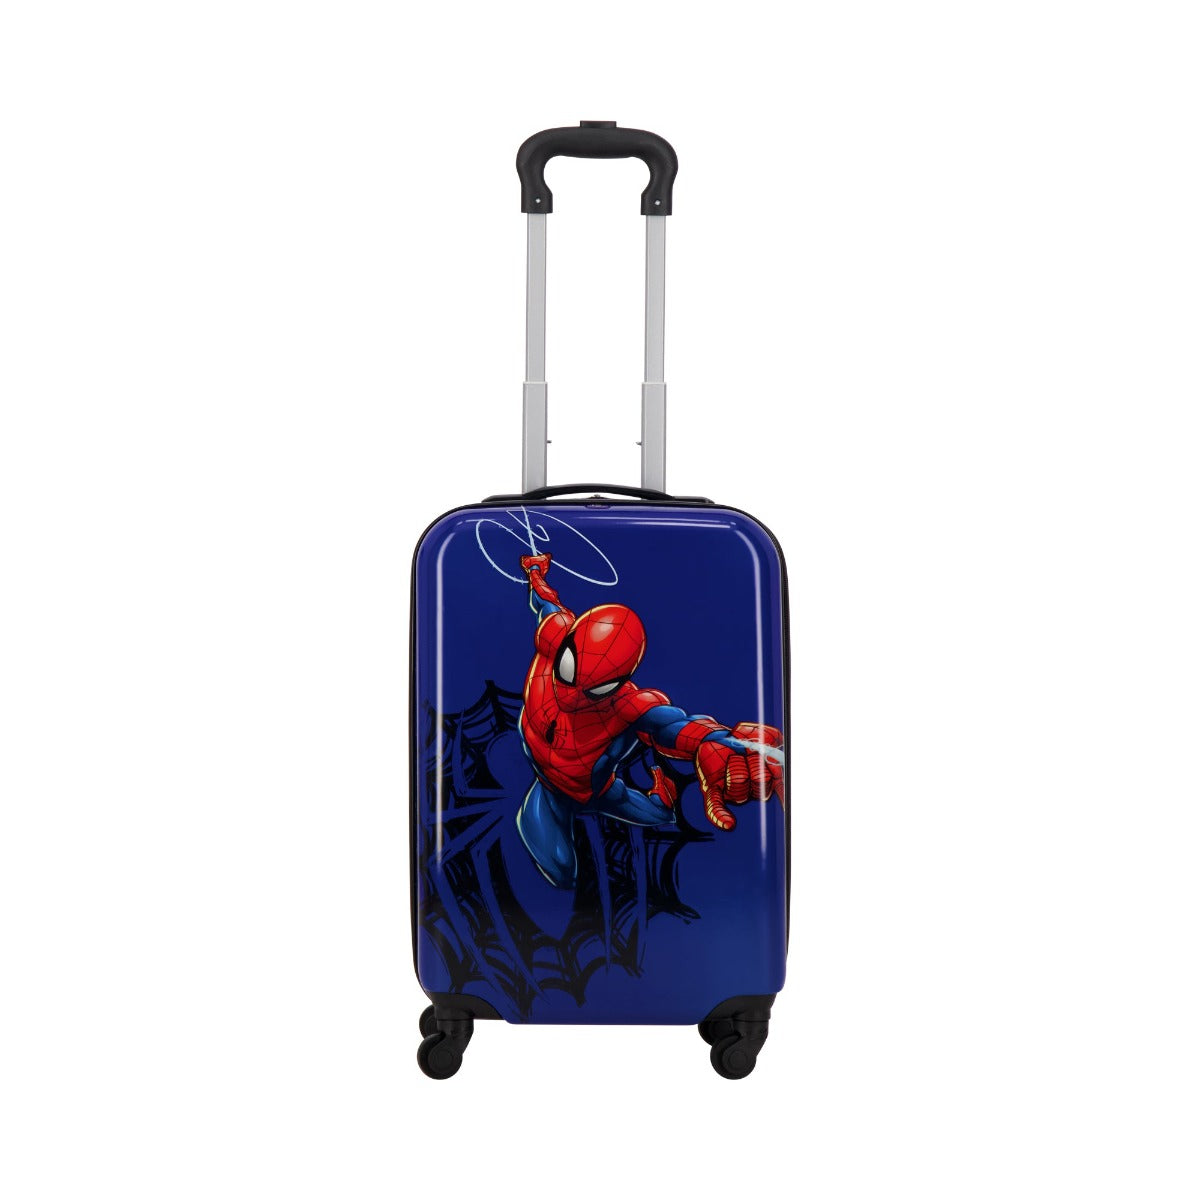 Blue Ful Marvel Spiderman web 21" suitcase - kids carry-on rolling luggage for travel